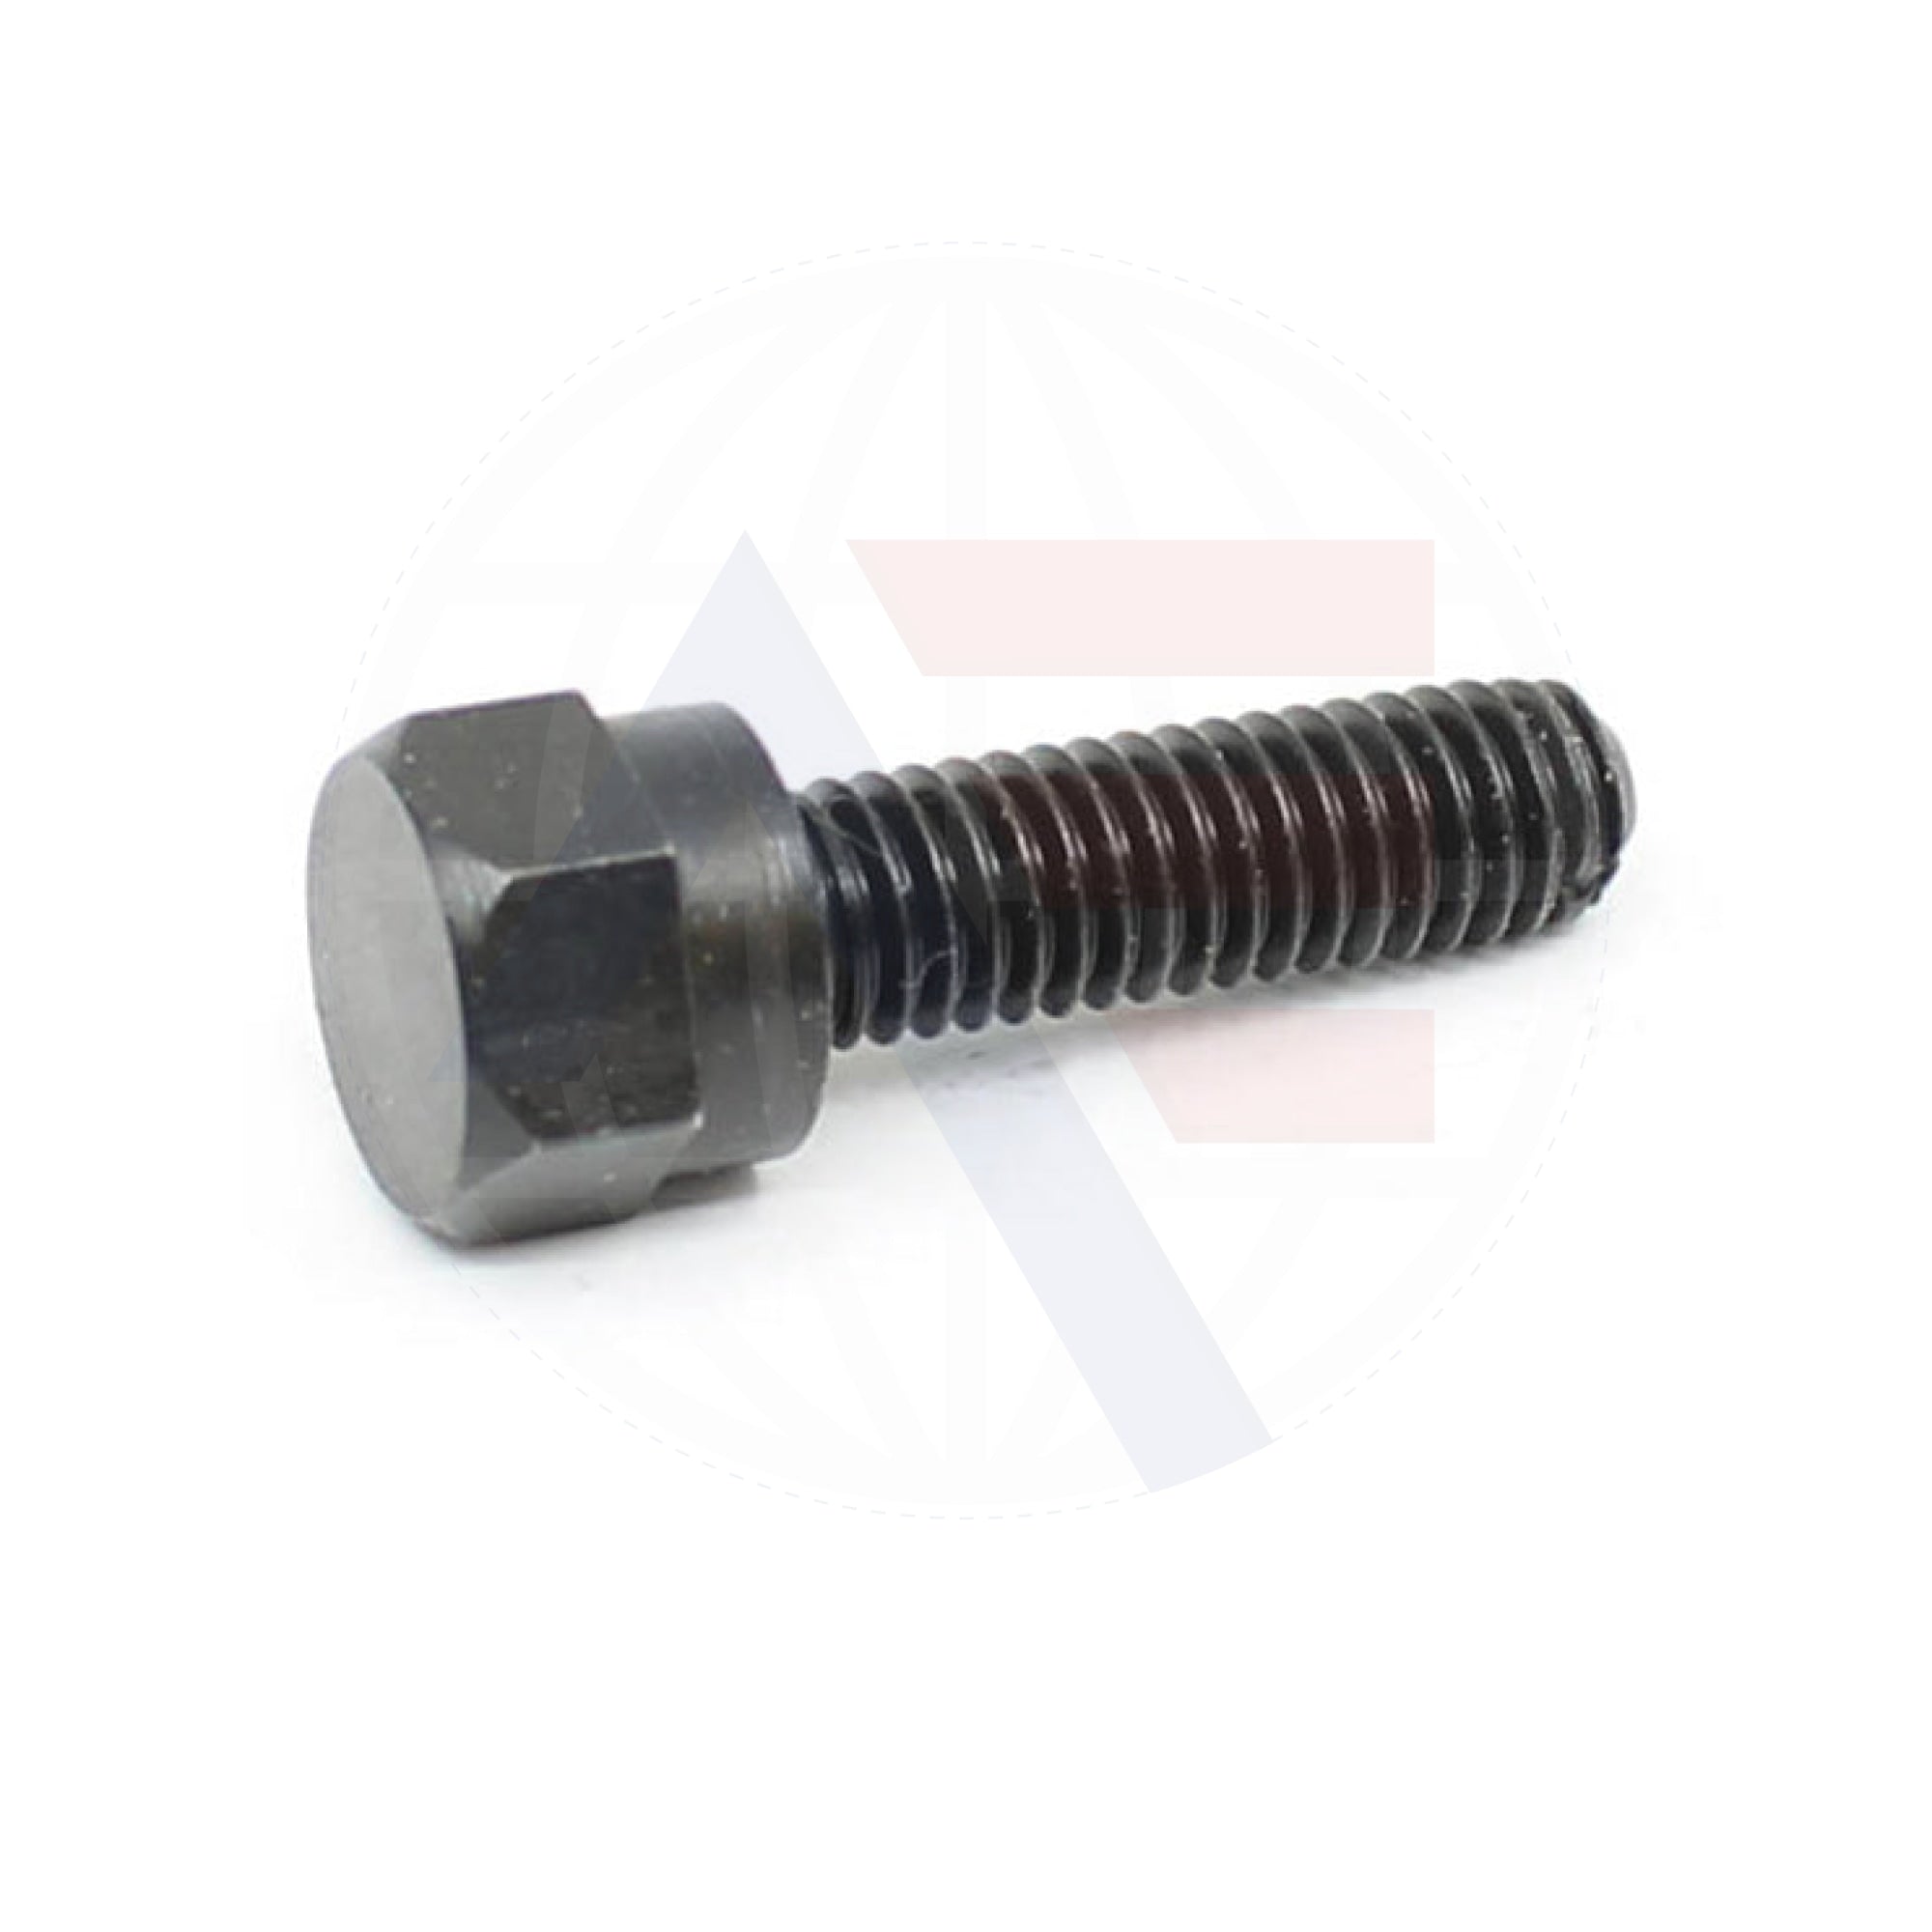 Y5549 Clamping Screw